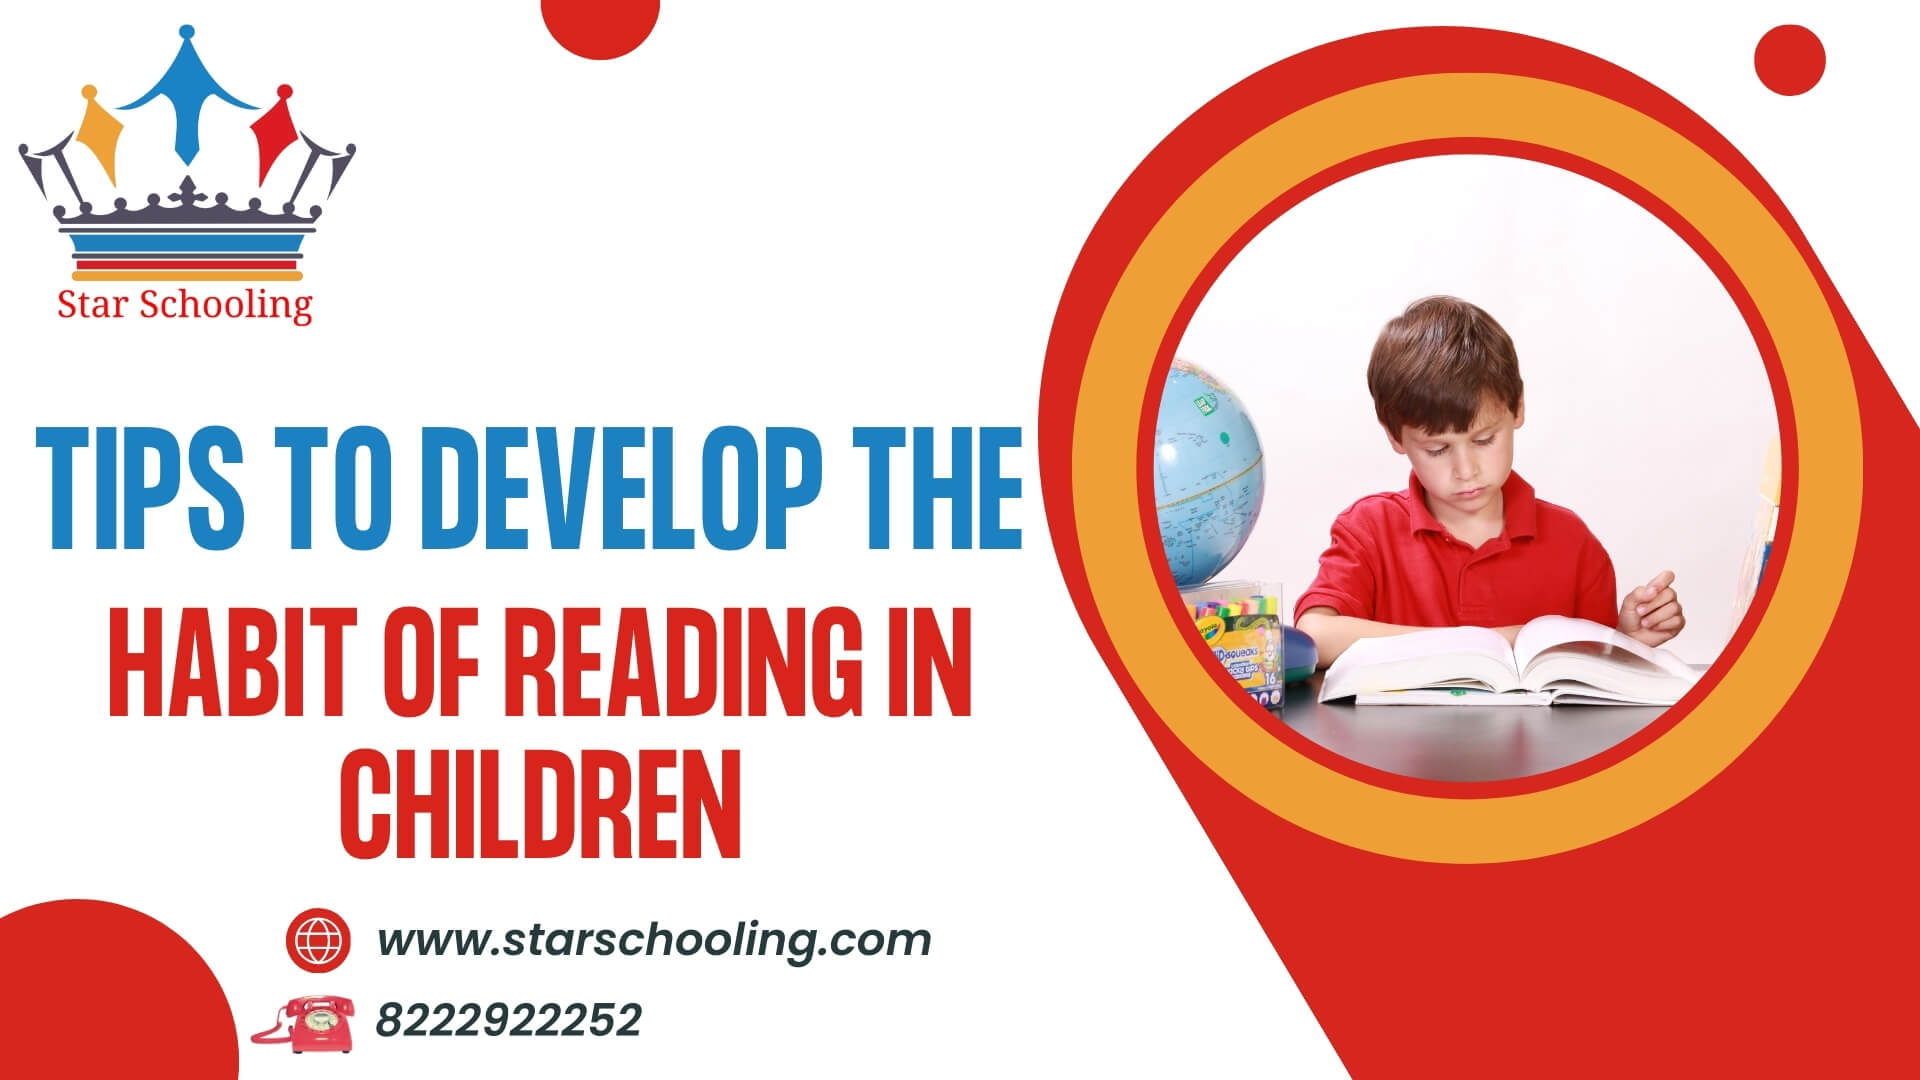 Tips to develop the habit of reading in children